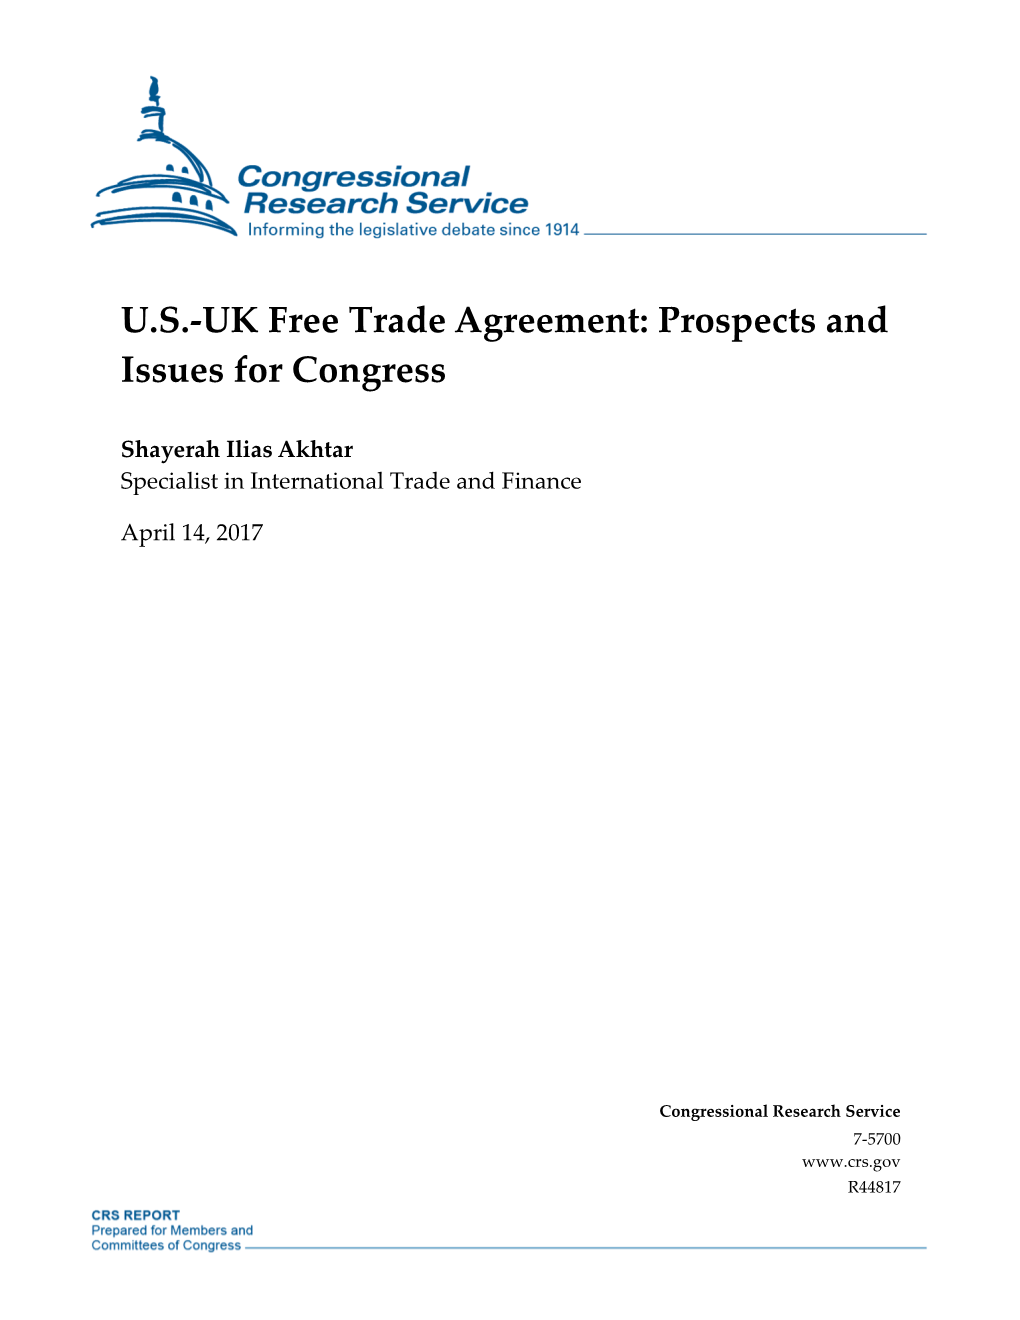 U.S.-UK Free Trade Agreement: Prospects and Issues for Congress